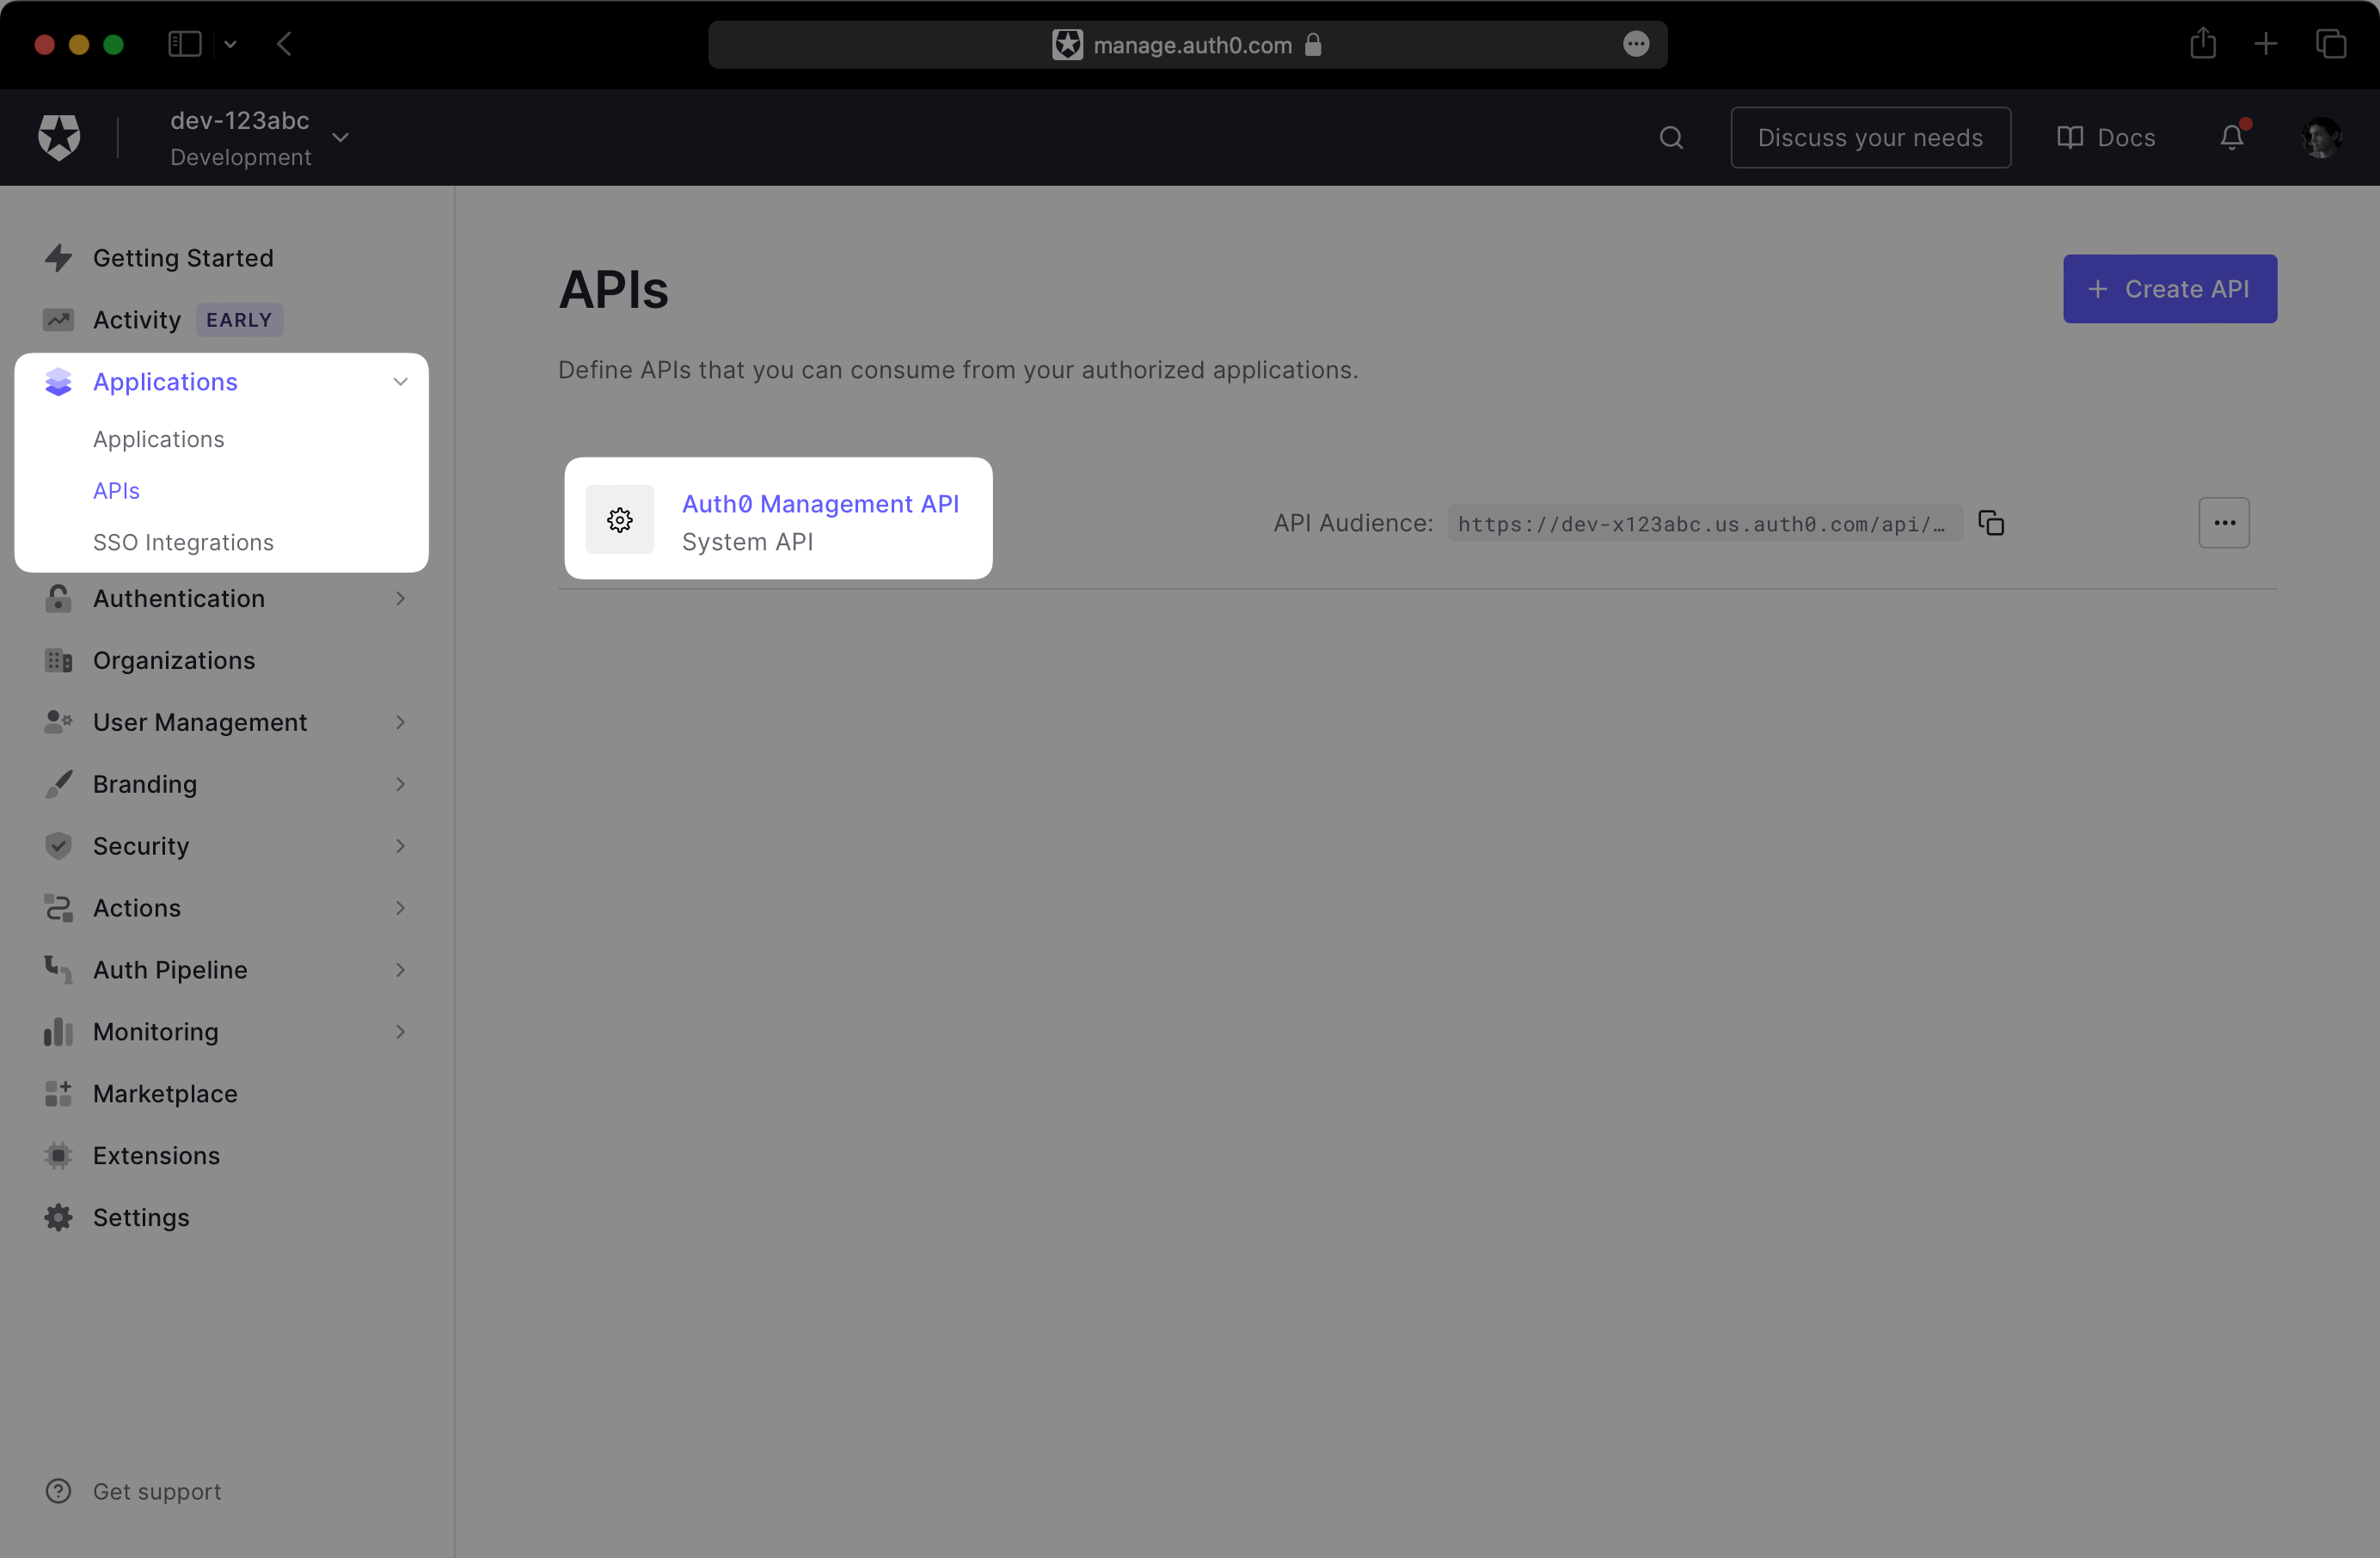 A screenshot showing the "Auth0 Management API" entry on the Auth0 APIs page.